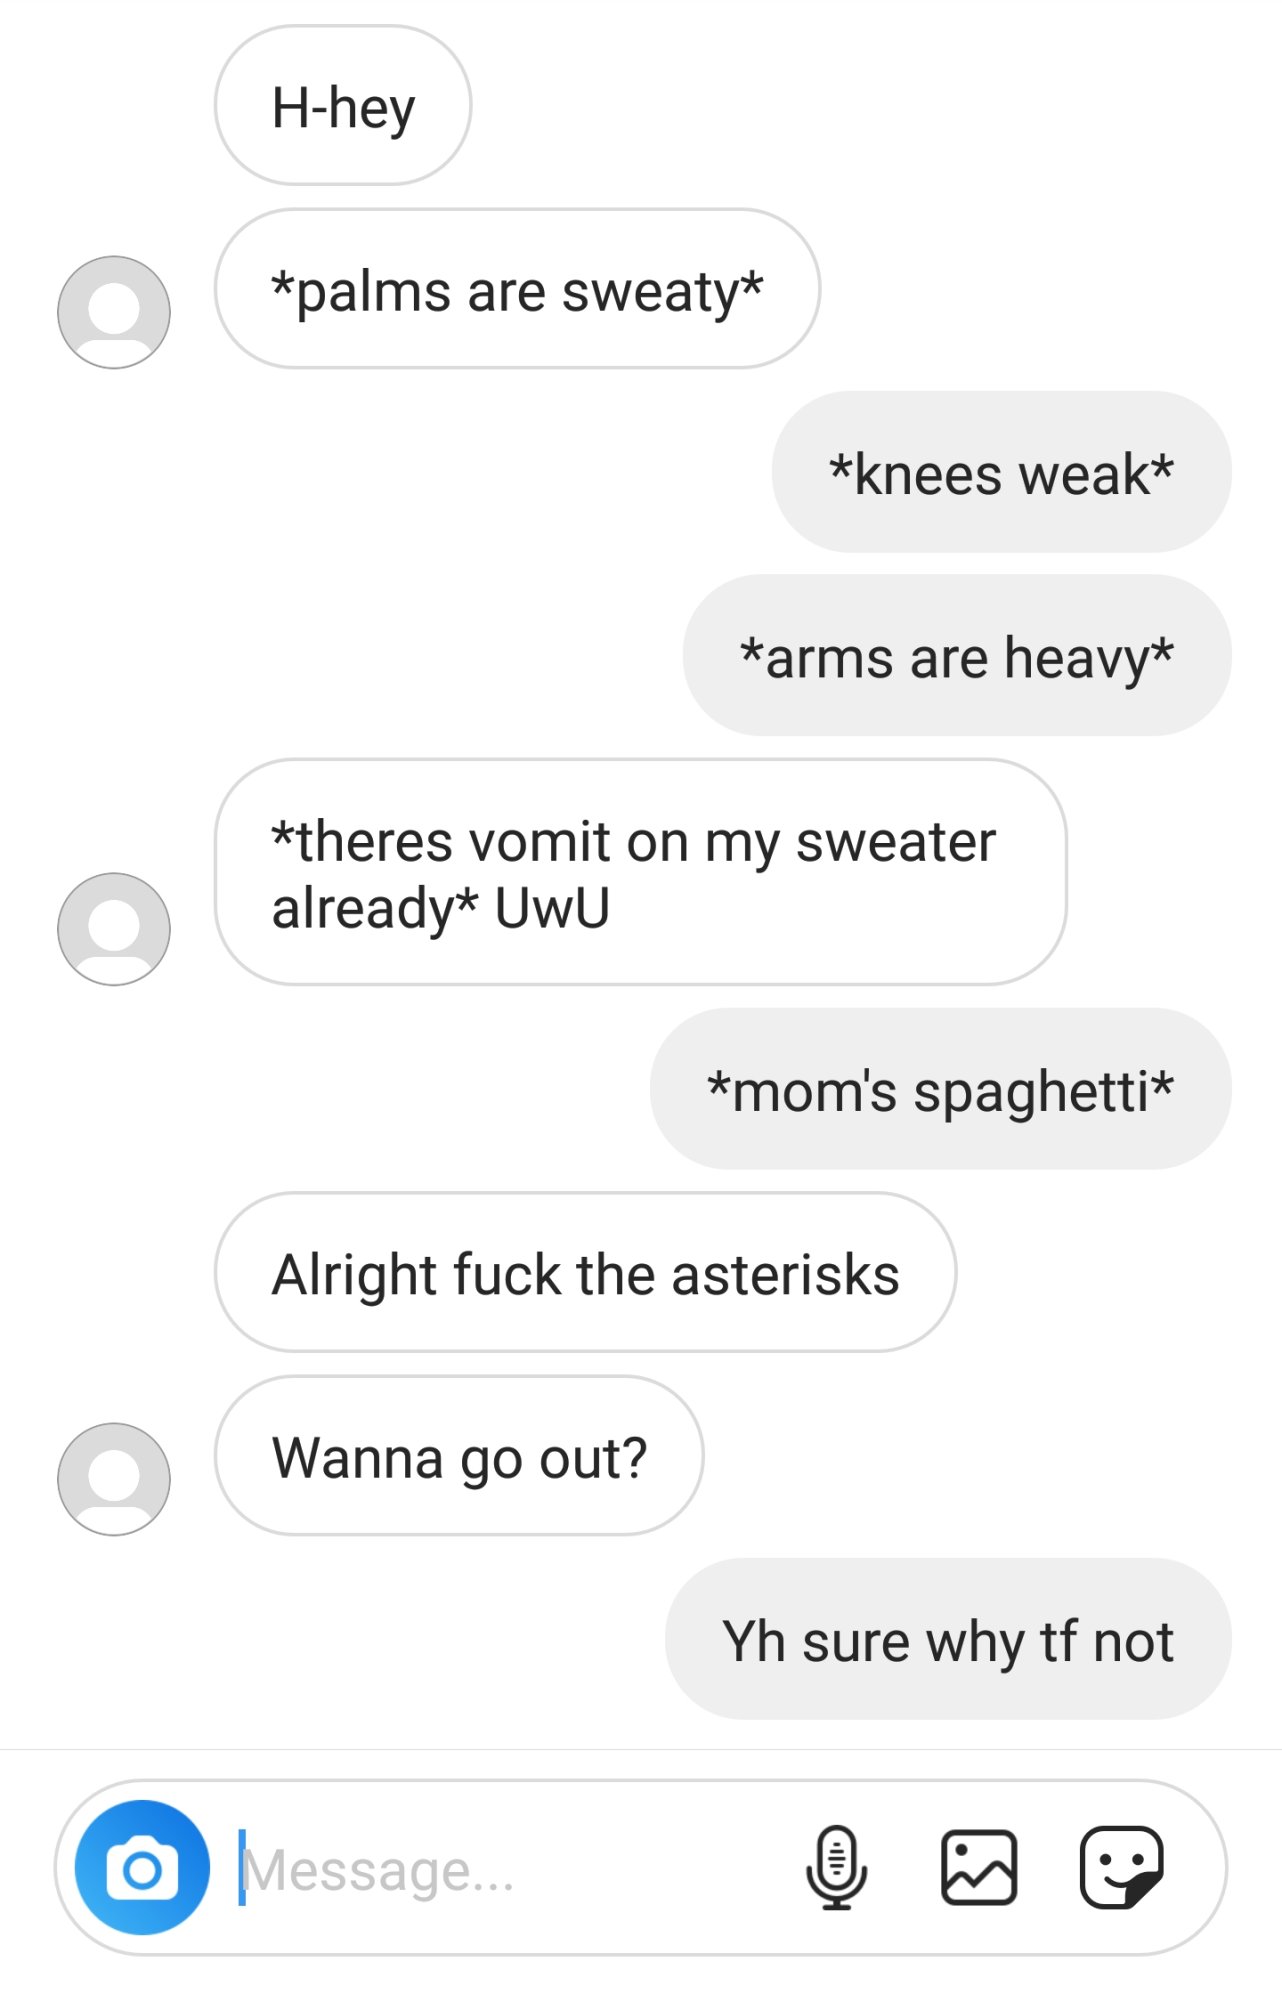 number - Hhey palms are sweaty knees weak arms are heavy theres vomit on my sweater already UwU mom's spaghetti Alright fuck the asterisks Wanna go out? Yh sure why tf not O message. age. @ @ @